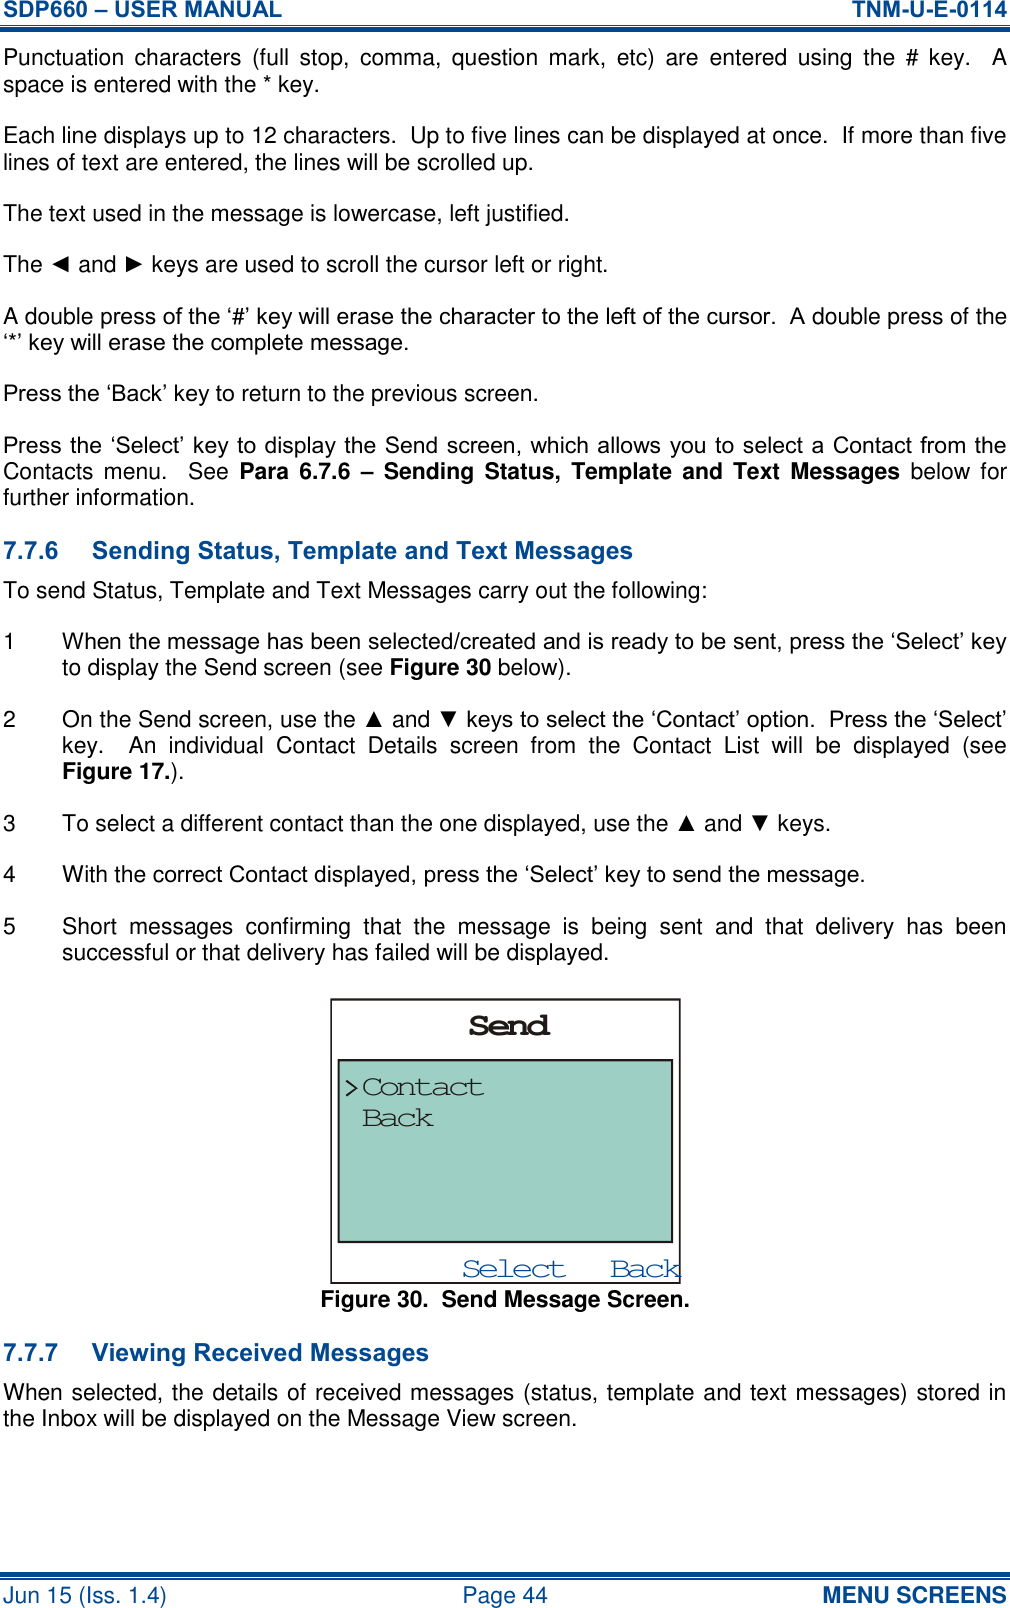 SDP660 – USER MANUAL  TNM-U-E-0114 Jun 15 (Iss. 1.4)  Page 44 MENU SCREENS Punctuation  characters  (full  stop,  comma,  question  mark,  etc)  are  entered  using  the  #  key.    A space is entered with the * key. Each line displays up to 12 characters.  Up to five lines can be displayed at once.  If more than five lines of text are entered, the lines will be scrolled up. The text used in the message is lowercase, left justified. The ◄ and ► keys are used to scroll the cursor left or right. A double press of the ‘#’ key will erase the character to the left of the cursor.  A double press of the ‘*’ key will erase the complete message. Press the ‘Back’ key to return to the previous screen. Press the ‘Select’ key to display the Send screen, which allows you to select a Contact from the Contacts  menu.    See  Para  6.7.6  – Sending  Status,  Template and  Text  Messages  below for further information. 7.7.6 Sending Status, Template and Text Messages To send Status, Template and Text Messages carry out the following: 1  When the message has been selected/created and is ready to be sent, press the ‘Select’ key to display the Send screen (see Figure 30 below). 2  On the Send screen, use the ▲ and ▼ keys to select the ‘Contact’ option.  Press the ‘Select’ key.    An  individual  Contact  Details  screen  from  the  Contact  List  will  be  displayed  (see Figure 17.). 3  To select a different contact than the one displayed, use the ▲ and ▼ keys. 4  With the correct Contact displayed, press the ‘Select’ key to send the message. 5  Short  messages  confirming  that  the  message  is  being  sent  and  that  delivery  has  been successful or that delivery has failed will be displayed. Figure 30.  Send Message Screen. 7.7.7 Viewing Received Messages When selected, the details of received messages (status, template and text messages) stored in the Inbox will be displayed on the Message View screen. BackSelectSendContactBack